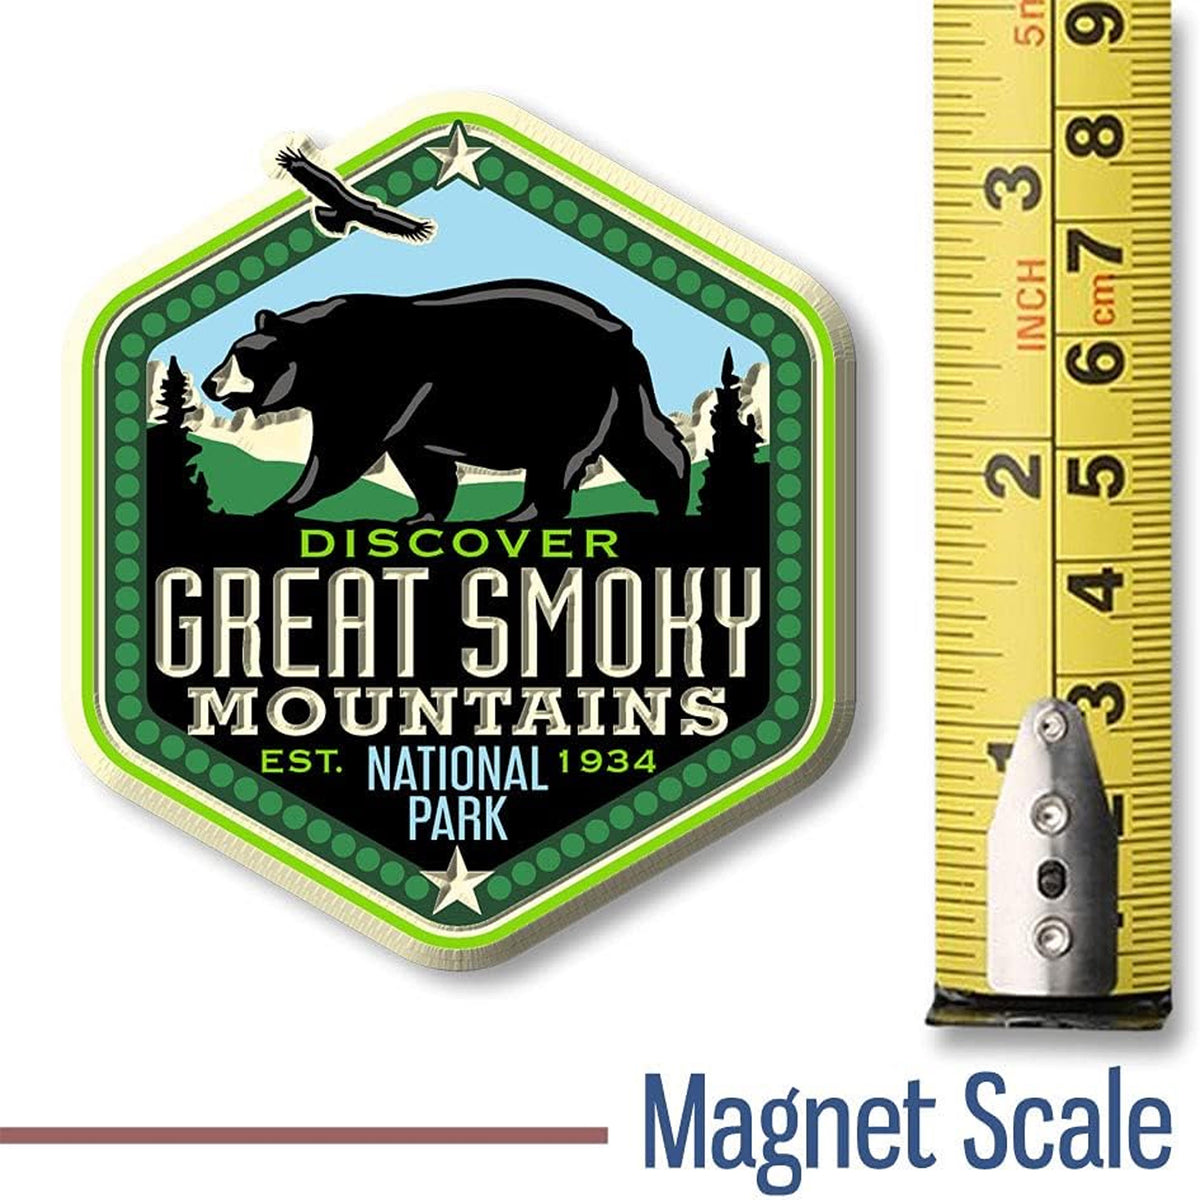 Great Smoky Mountains National Park with a Stunning Magnet MOQ - 36 pcs